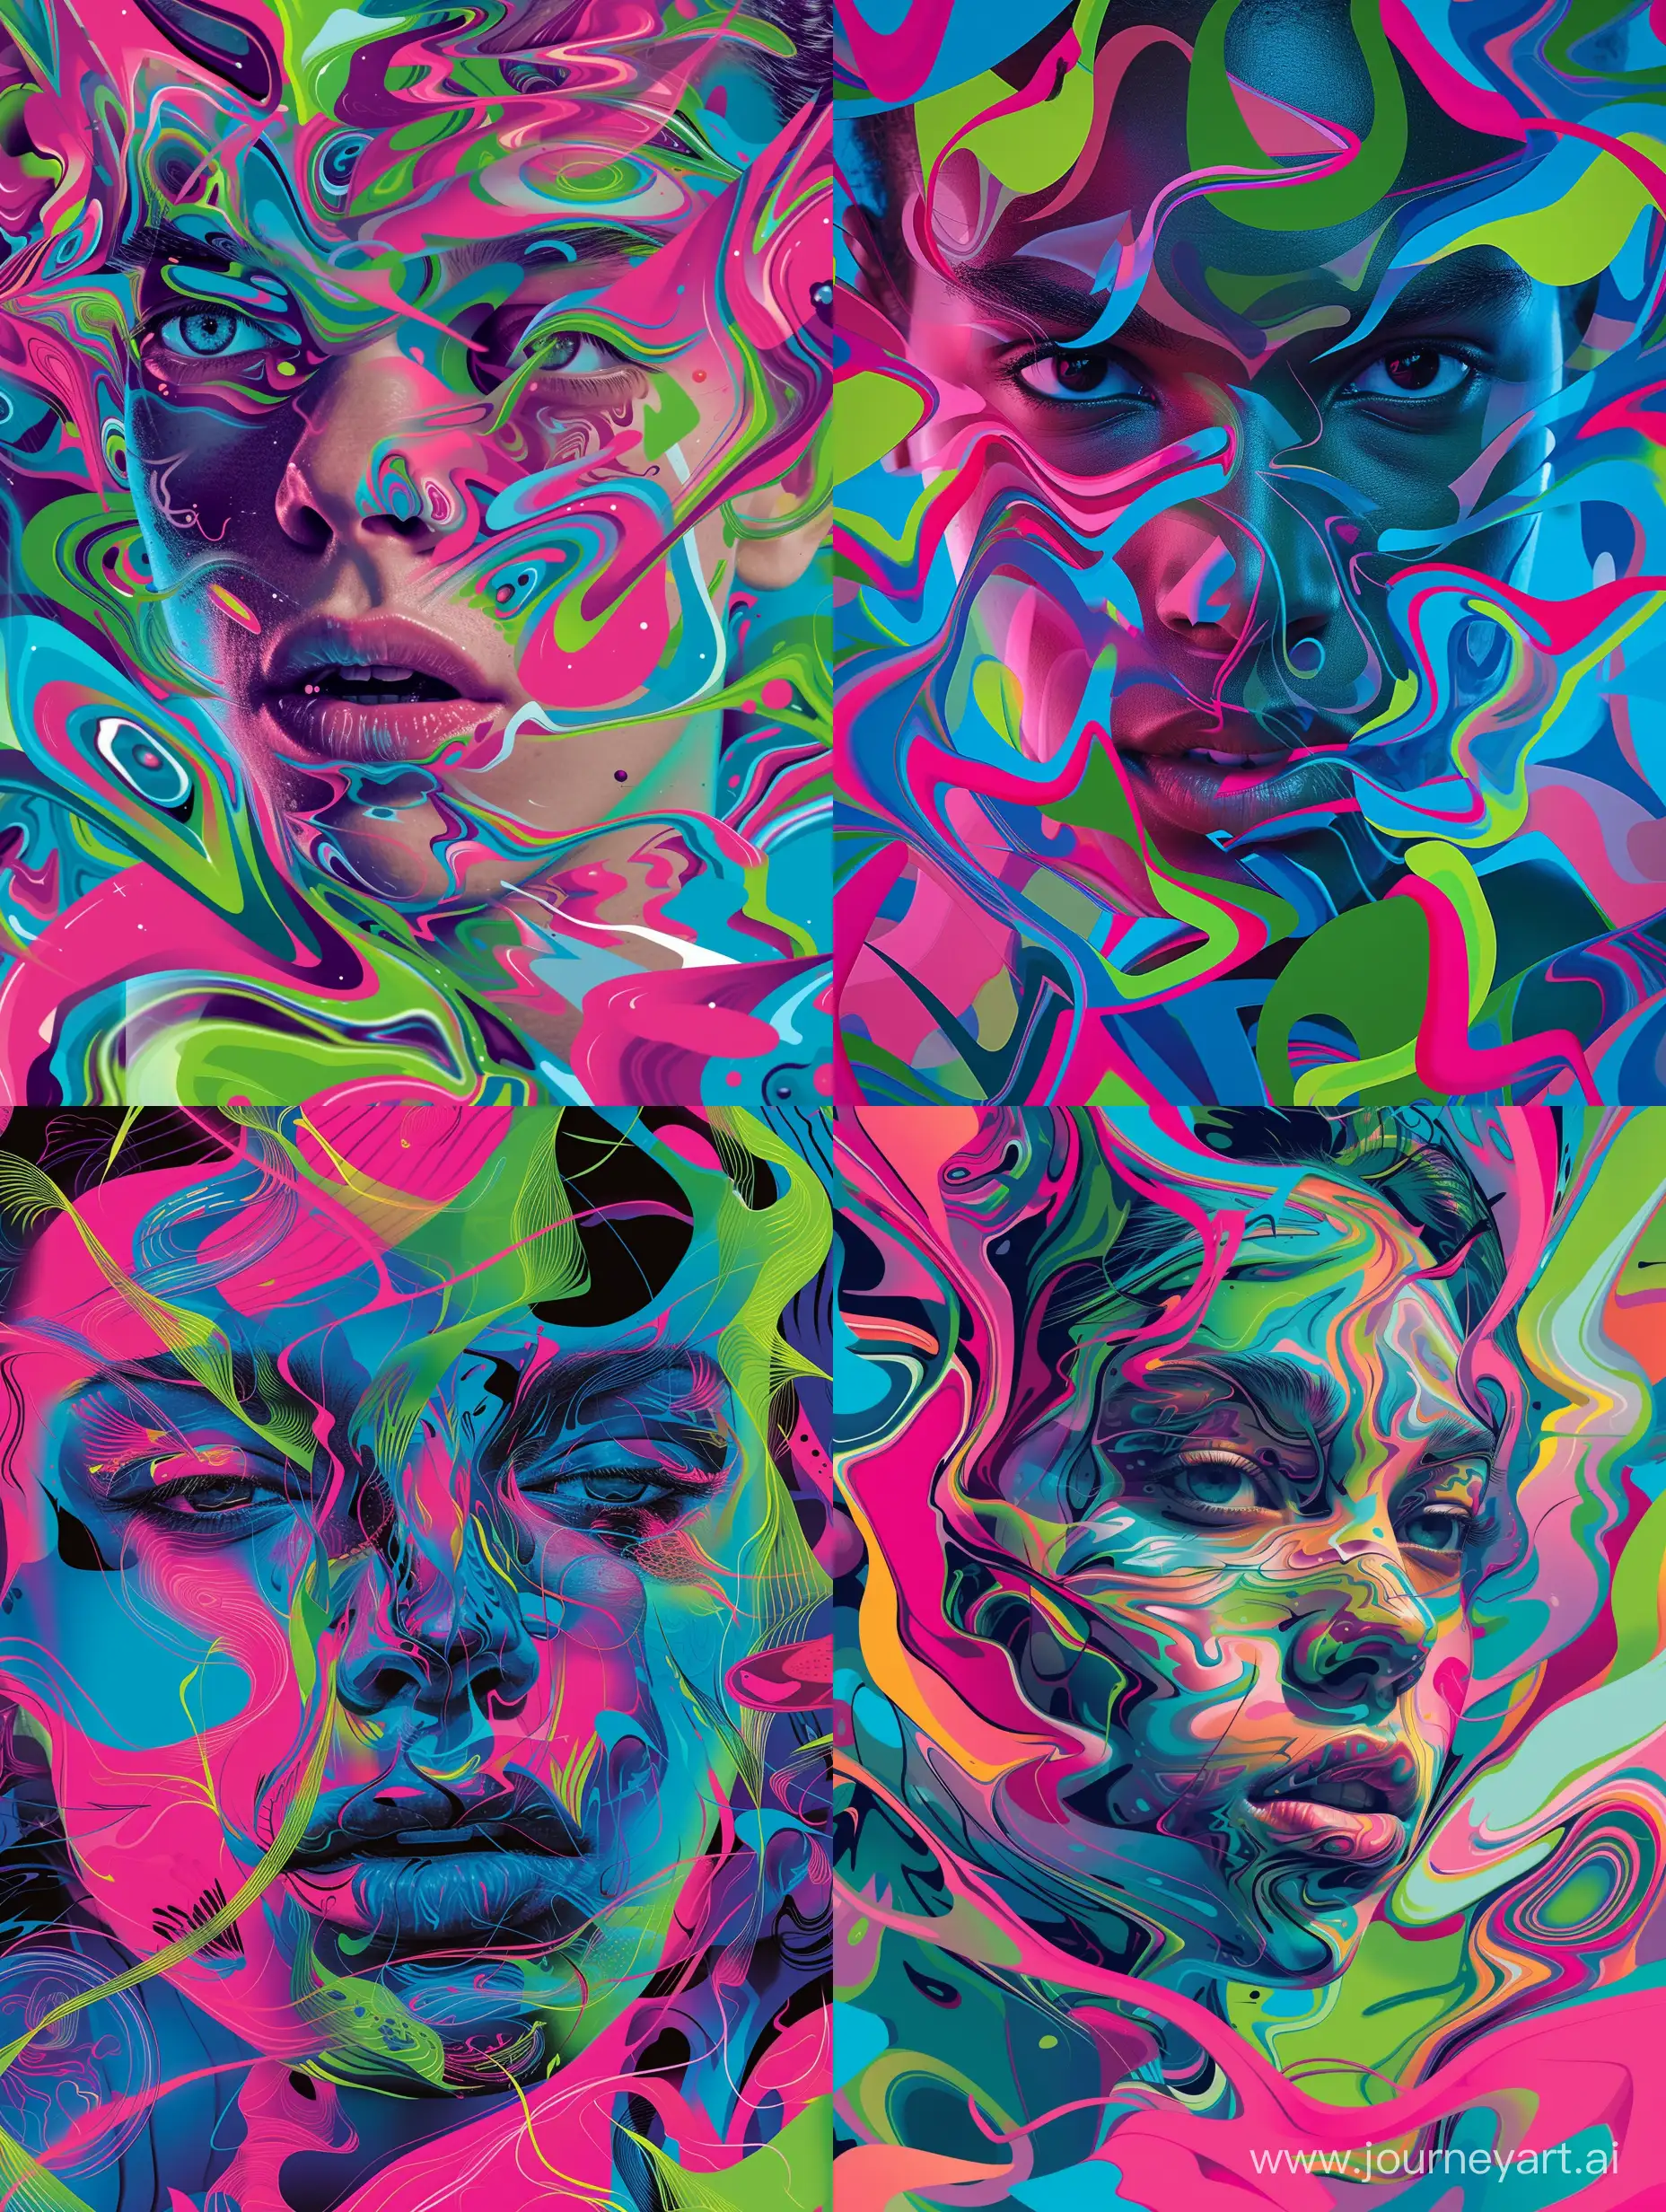 A striking portrait of an individual with their features intricately interwoven into a bold and colorful abstract design. The subject's face, with its piercing gaze and expressive lips, is the focal point of the composition, seamlessly blending into the vibrant shapes and forms surrounding it. The background is a kaleidoscope of neon hues, dominated by shades of pink, blue, green, and purple, creating a sense of depth and movement. As the colors swirl and converge, they form organic shapes that seem to shift and morph before the viewer's eyes, revealing hints of feline characteristics. The portrait is intertwined with these shapes, creating a sense of fluidity and harmony between the subject and their surroundings. The overall effect is that of a futuristic take on traditional portraiture, where the subject becomes one with the art, blurring the lines between reality and illusion. The image exudes a sense of confidence and grace, inviting the viewer to lose themselves in the mesmerizing pattern at the artist's skillful blending of the human form and abstract shapes.